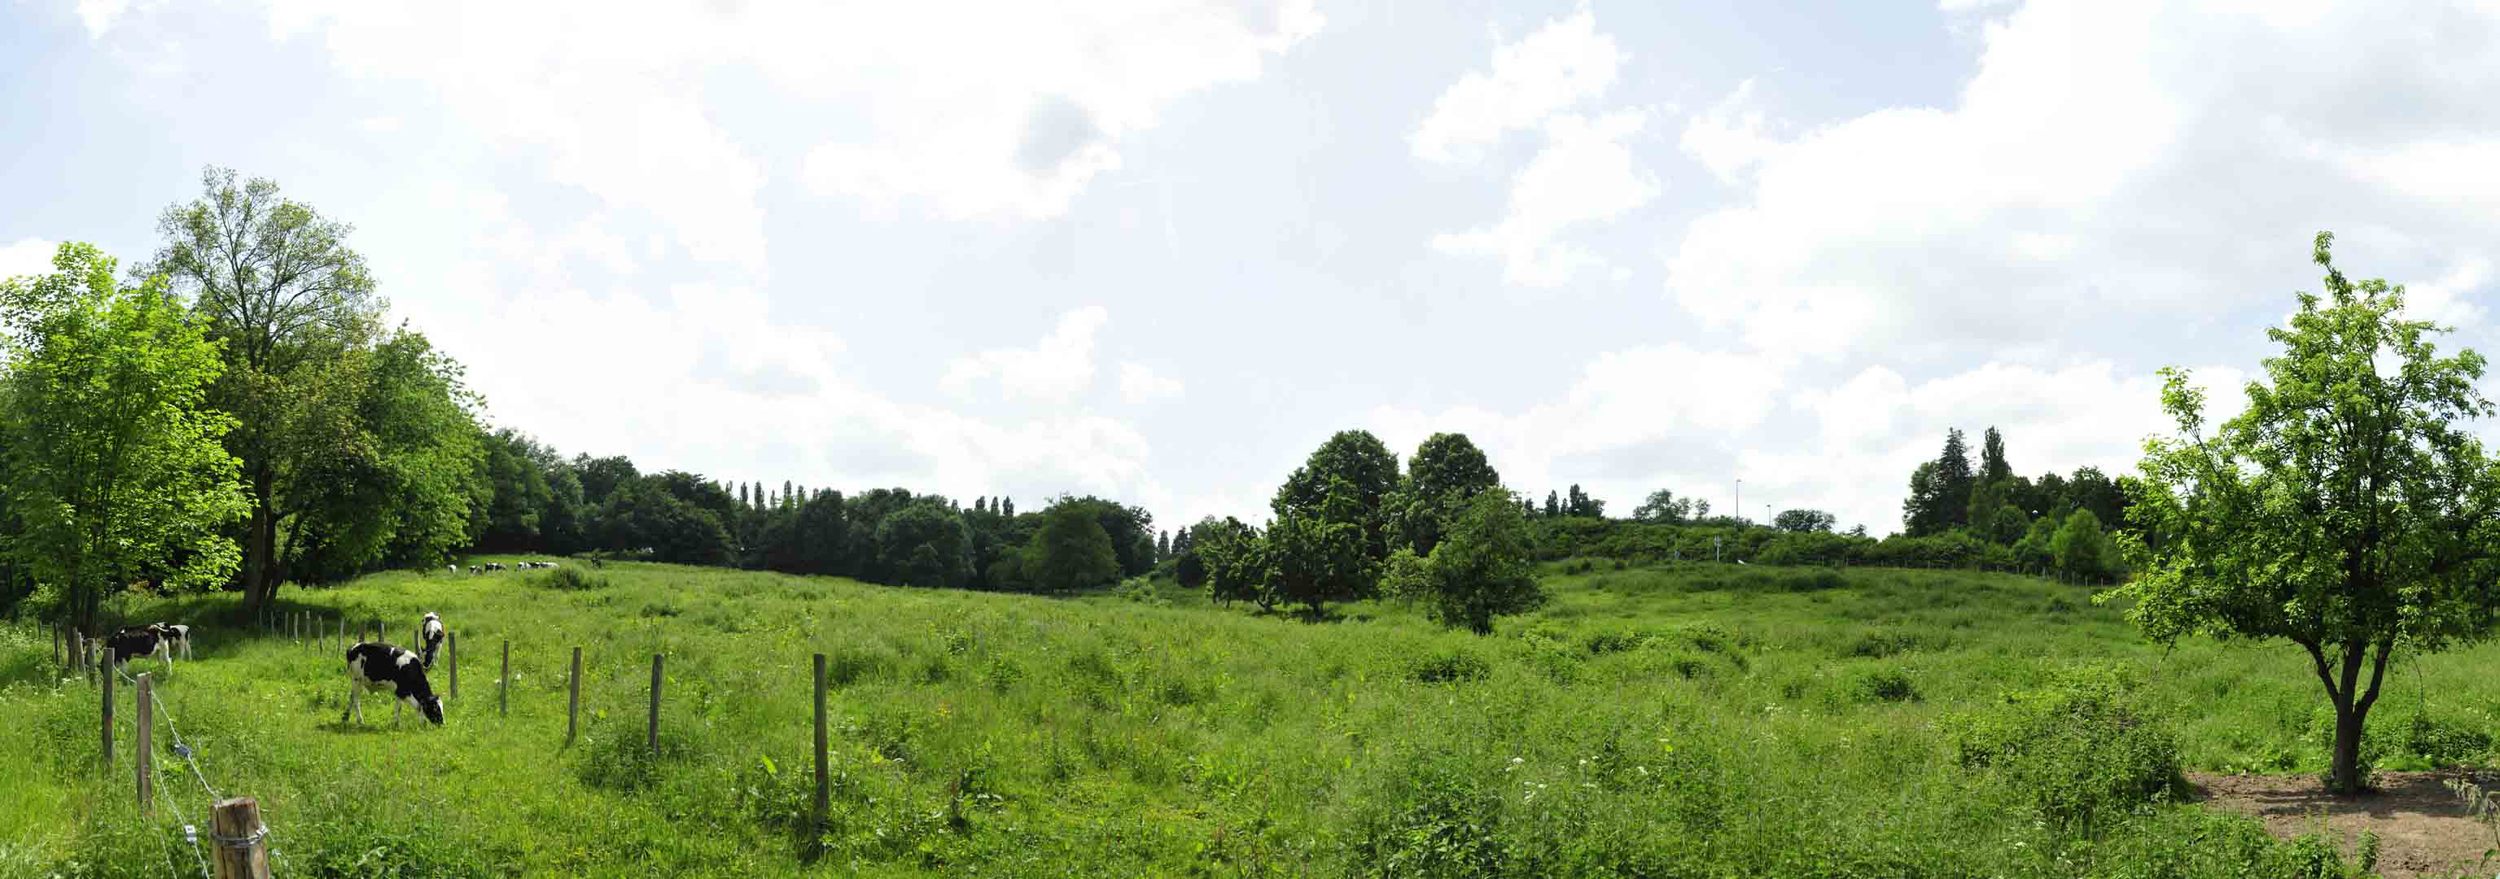 Panorama Pré paris france green cows vaches country campagne forest foret.jpg